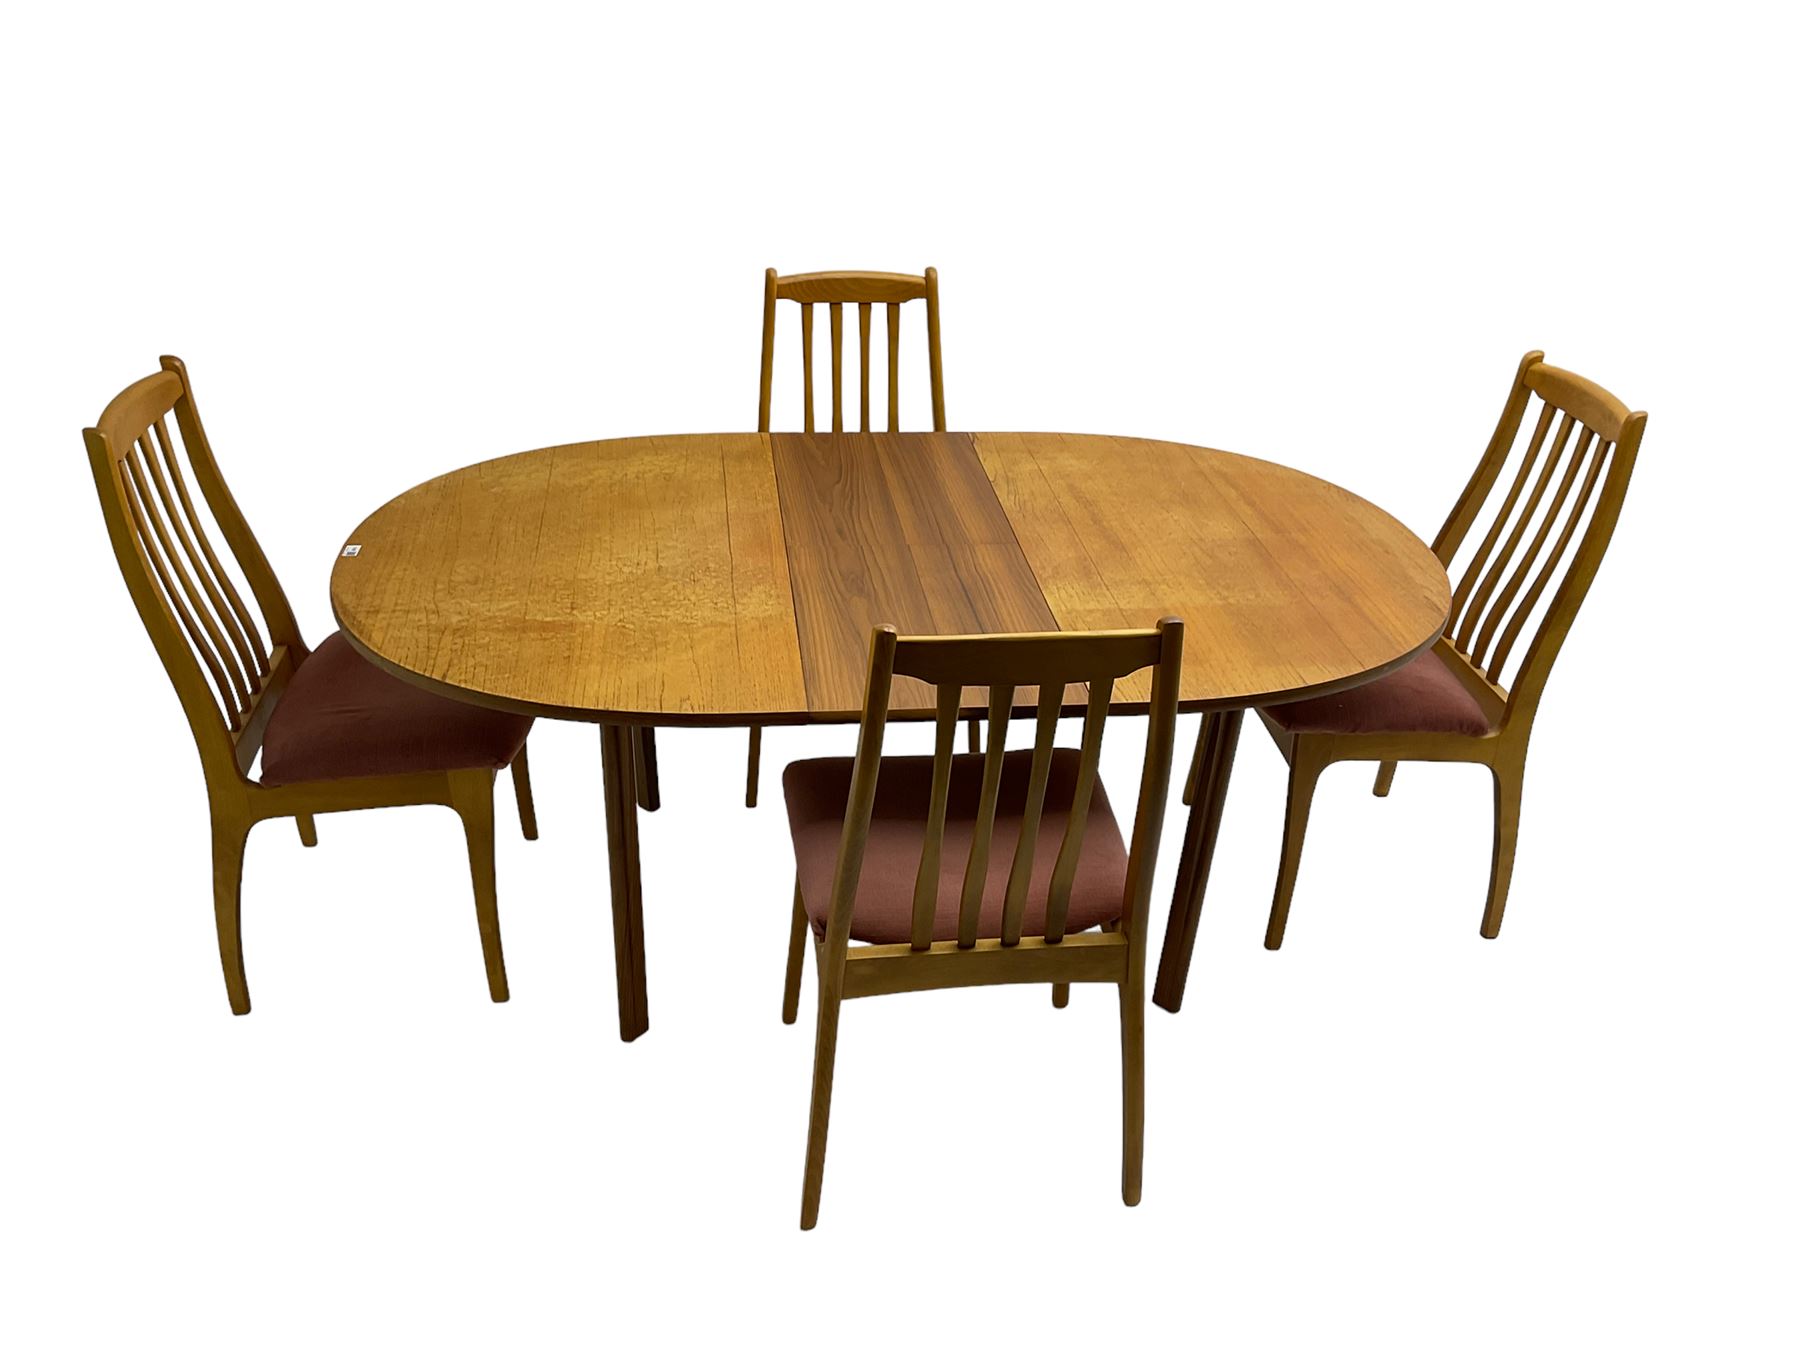 Portwood Furniture - mid-20th century teak extending dining table - Image 4 of 6